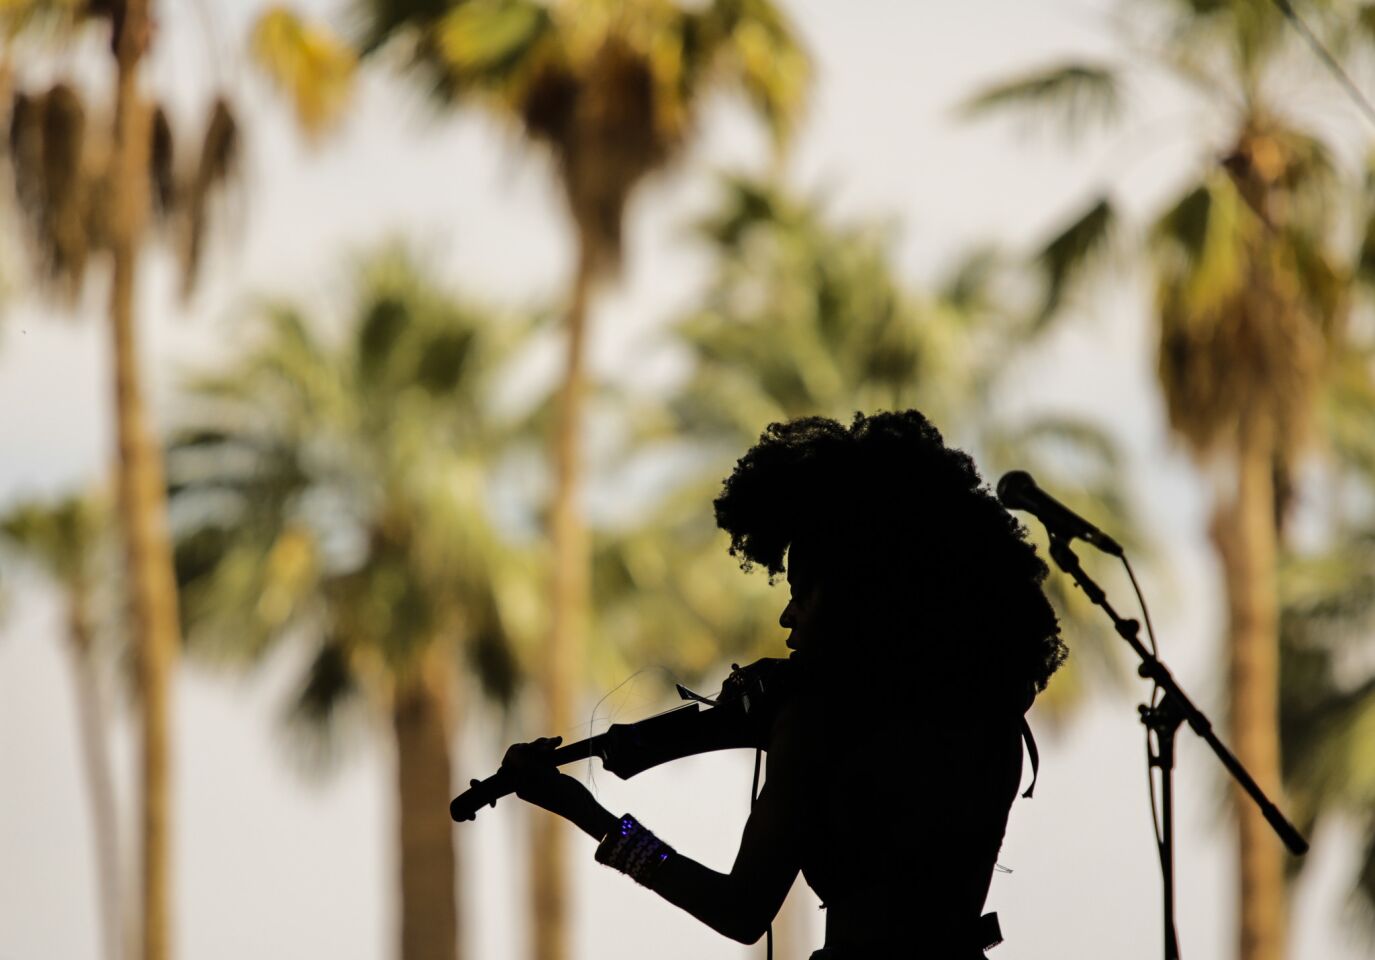 Sudan Archives plays the violin during her set at Coachella.